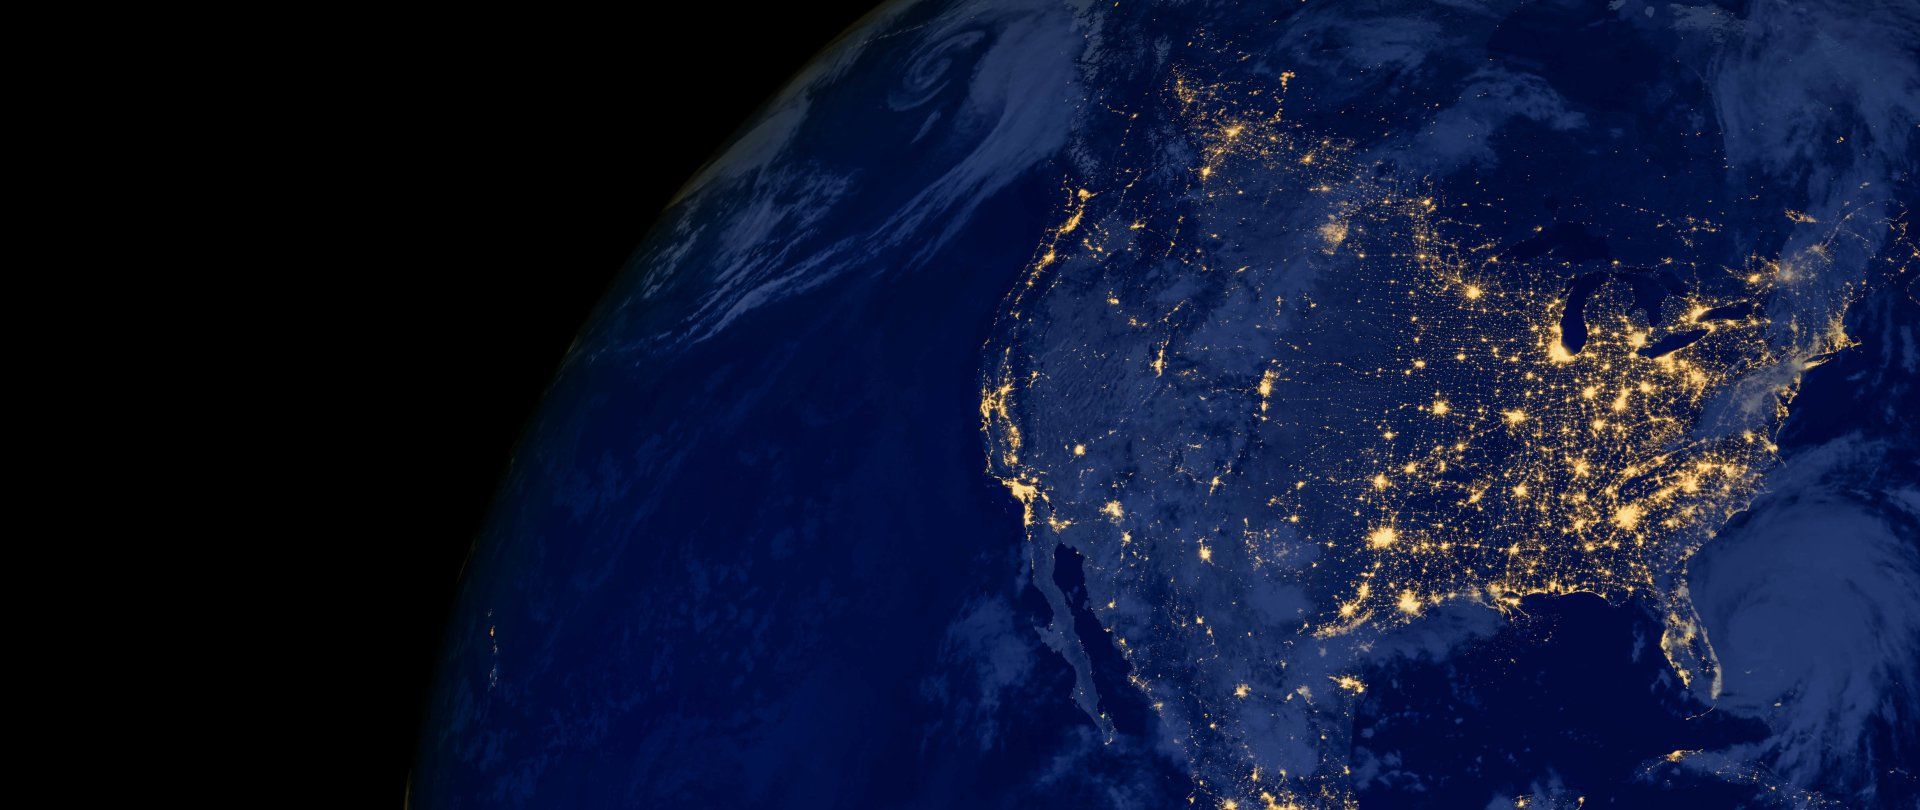 Graphic image of United States with satellite areas highlighted as lights/Links to the Capabilites web page information on analytics and intelligent operations